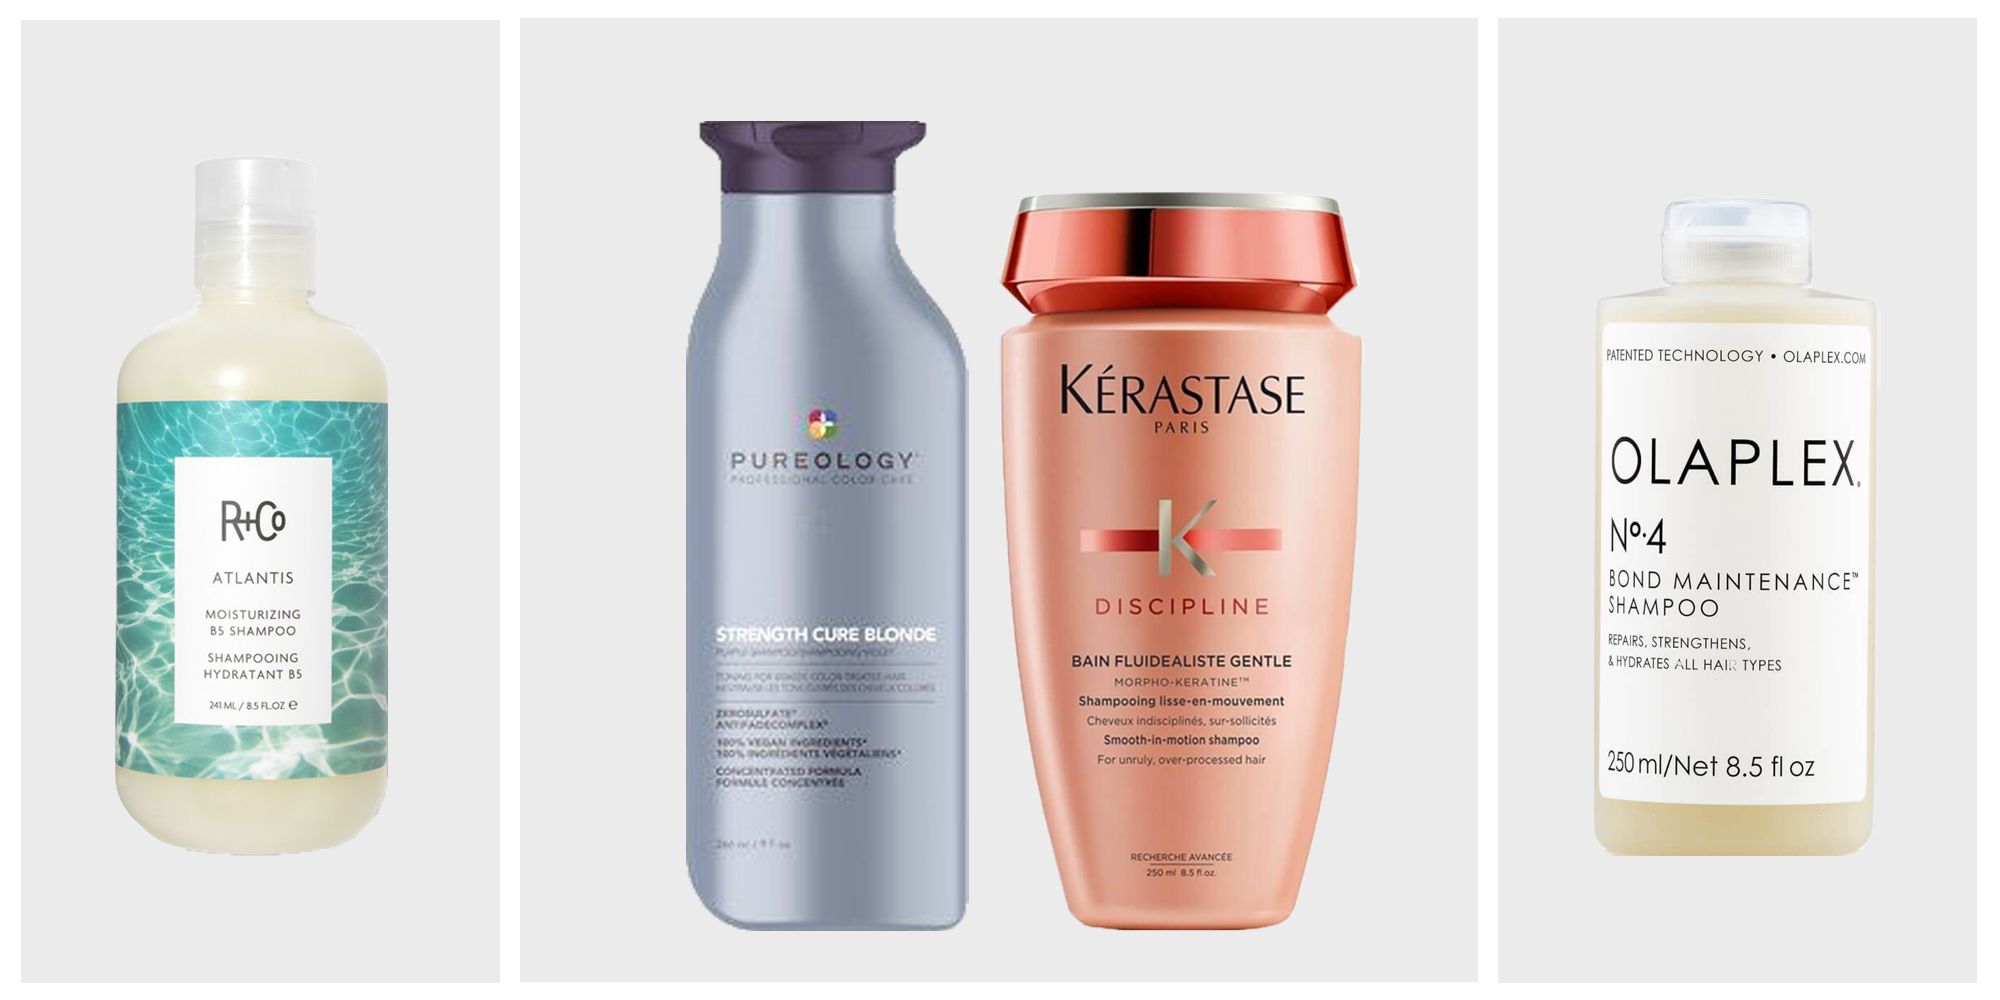 Best sulphate-free shampoo | Top SLS-free buy now